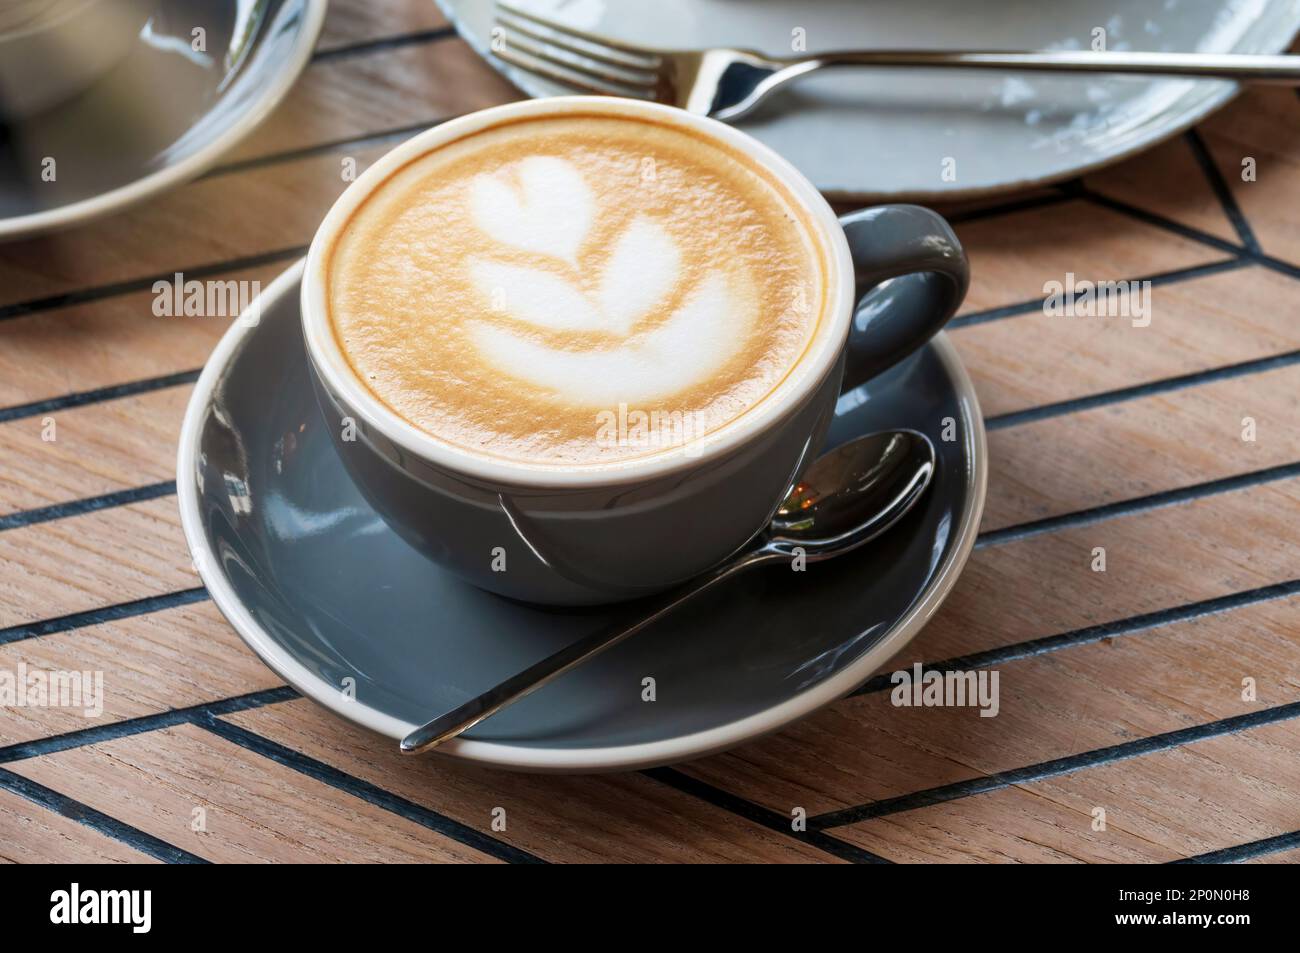 Delicious morning cup of cappuccino in a cafe Stock Photo